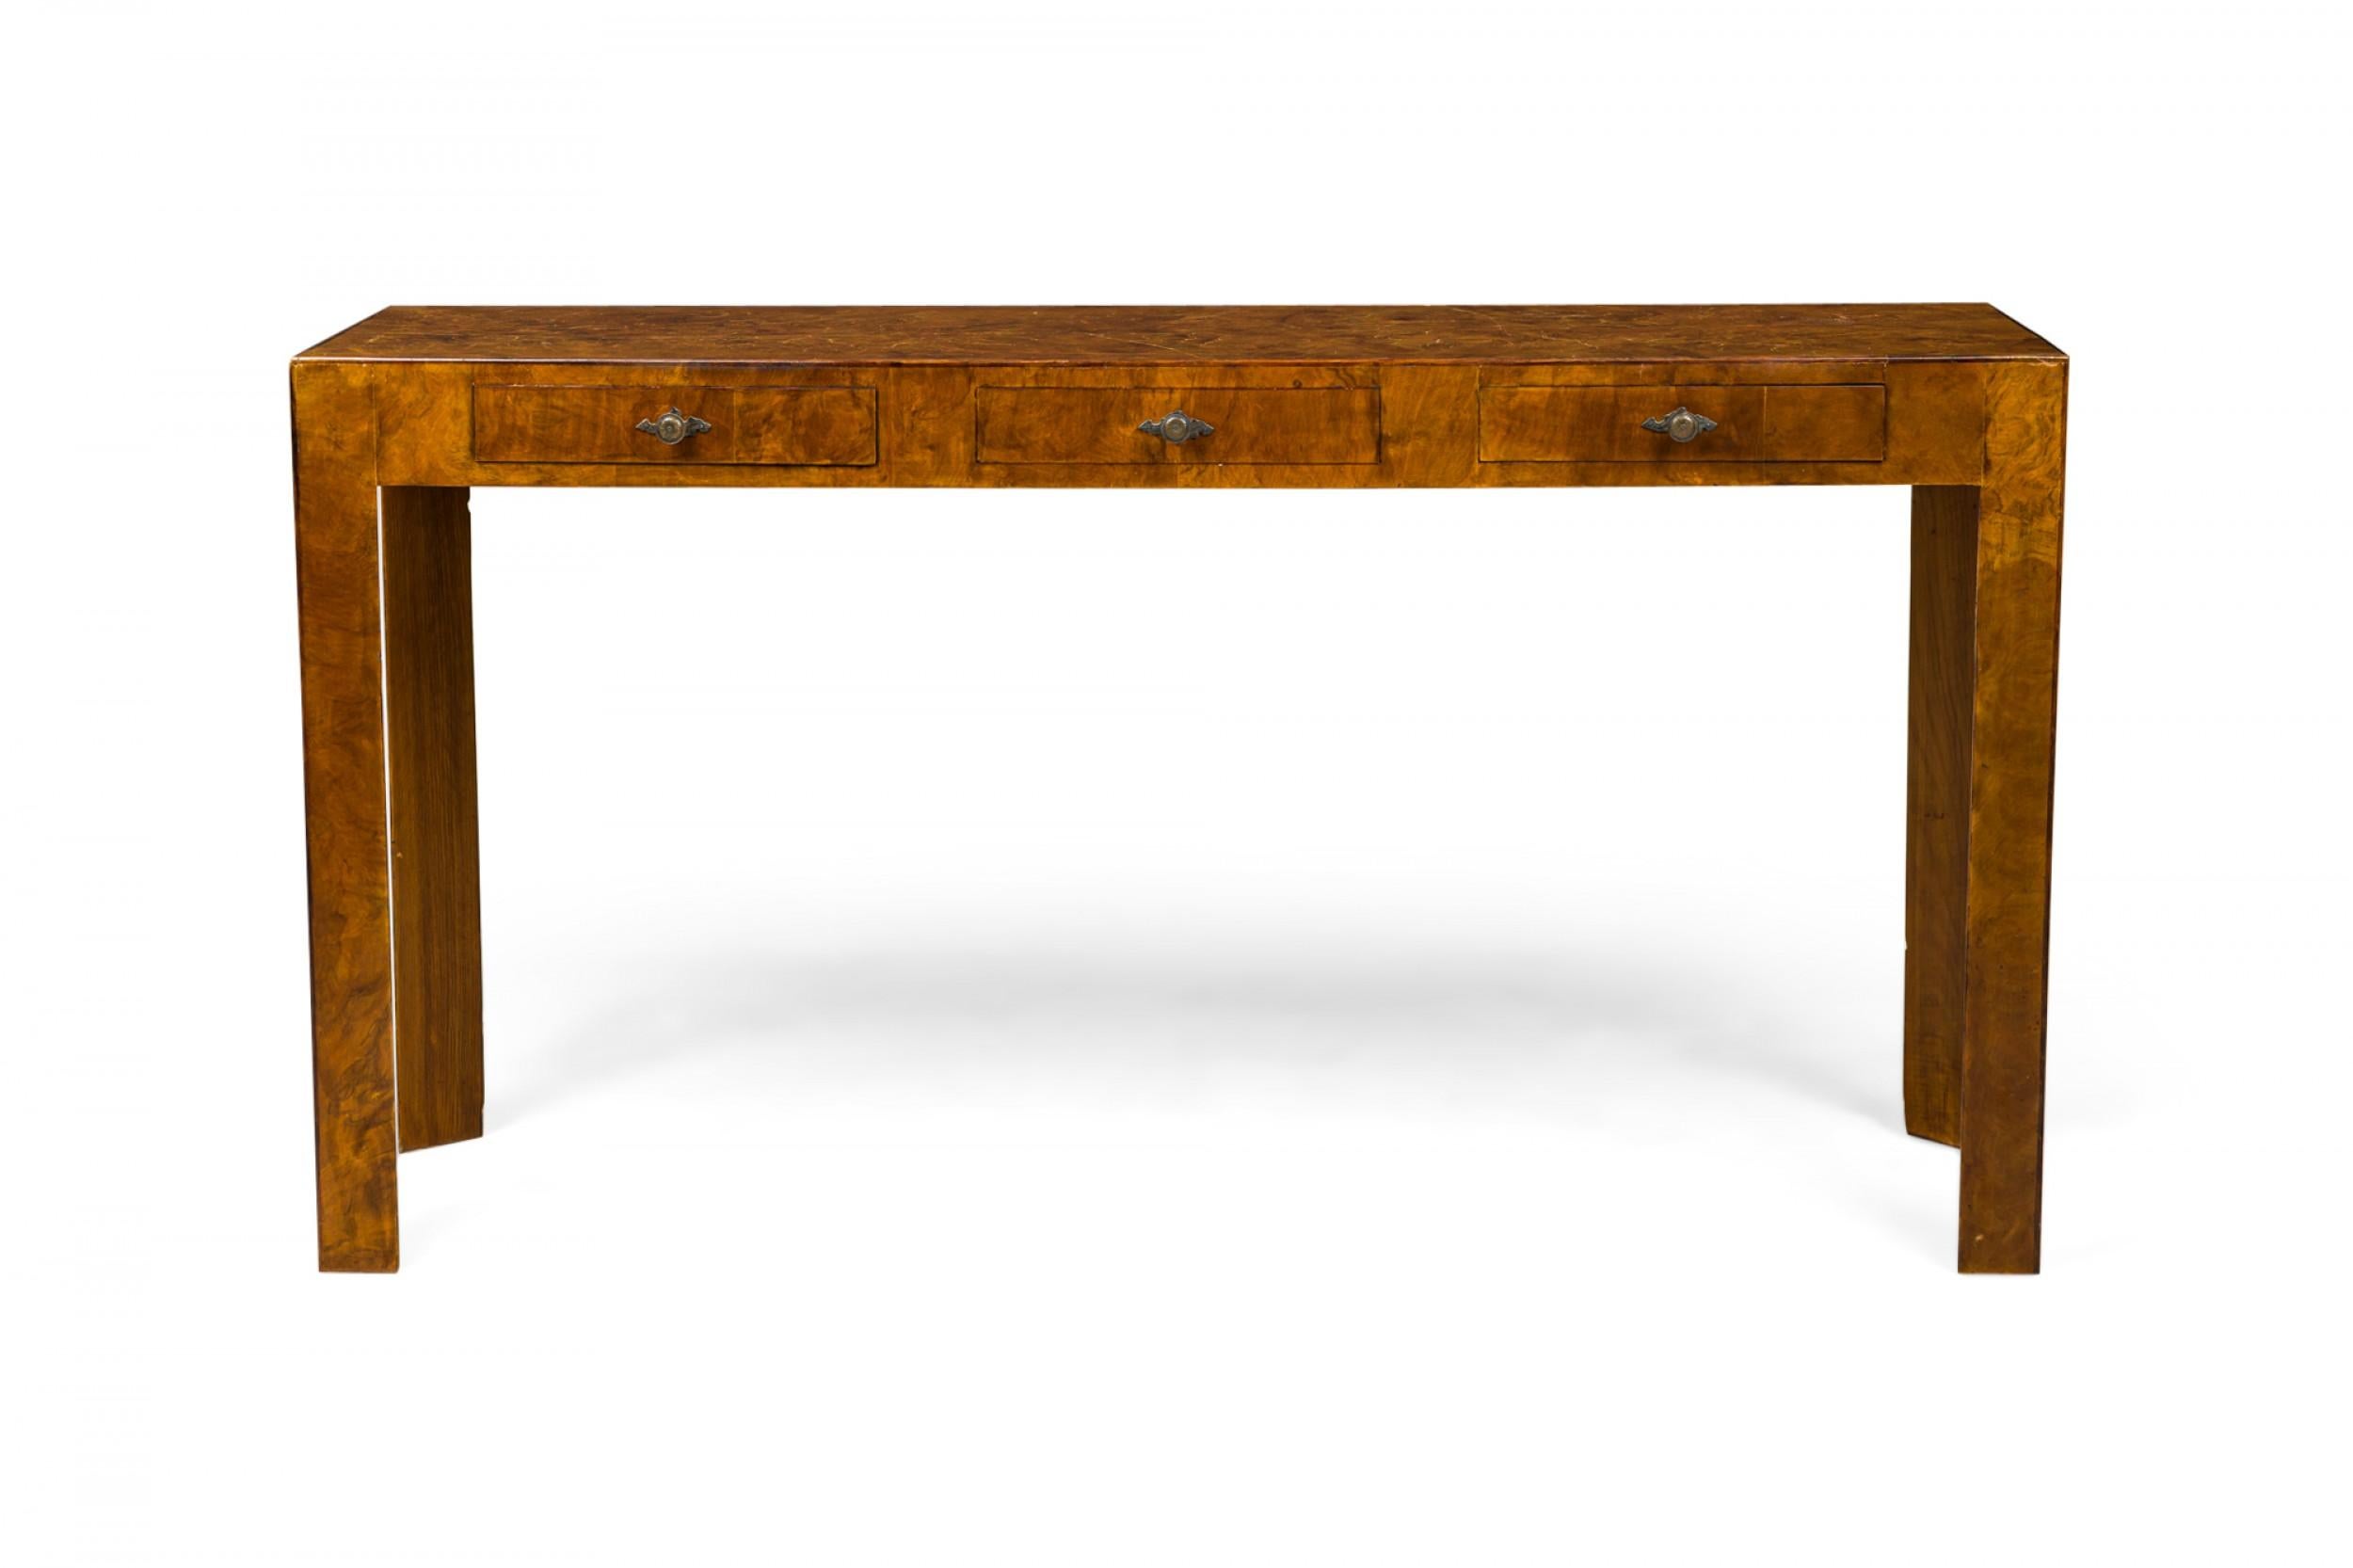 Italian Mid-Century rectangular console table with oyster burl veneer and three drawers with bronze drawer pulls, resting on four triangular legs.
